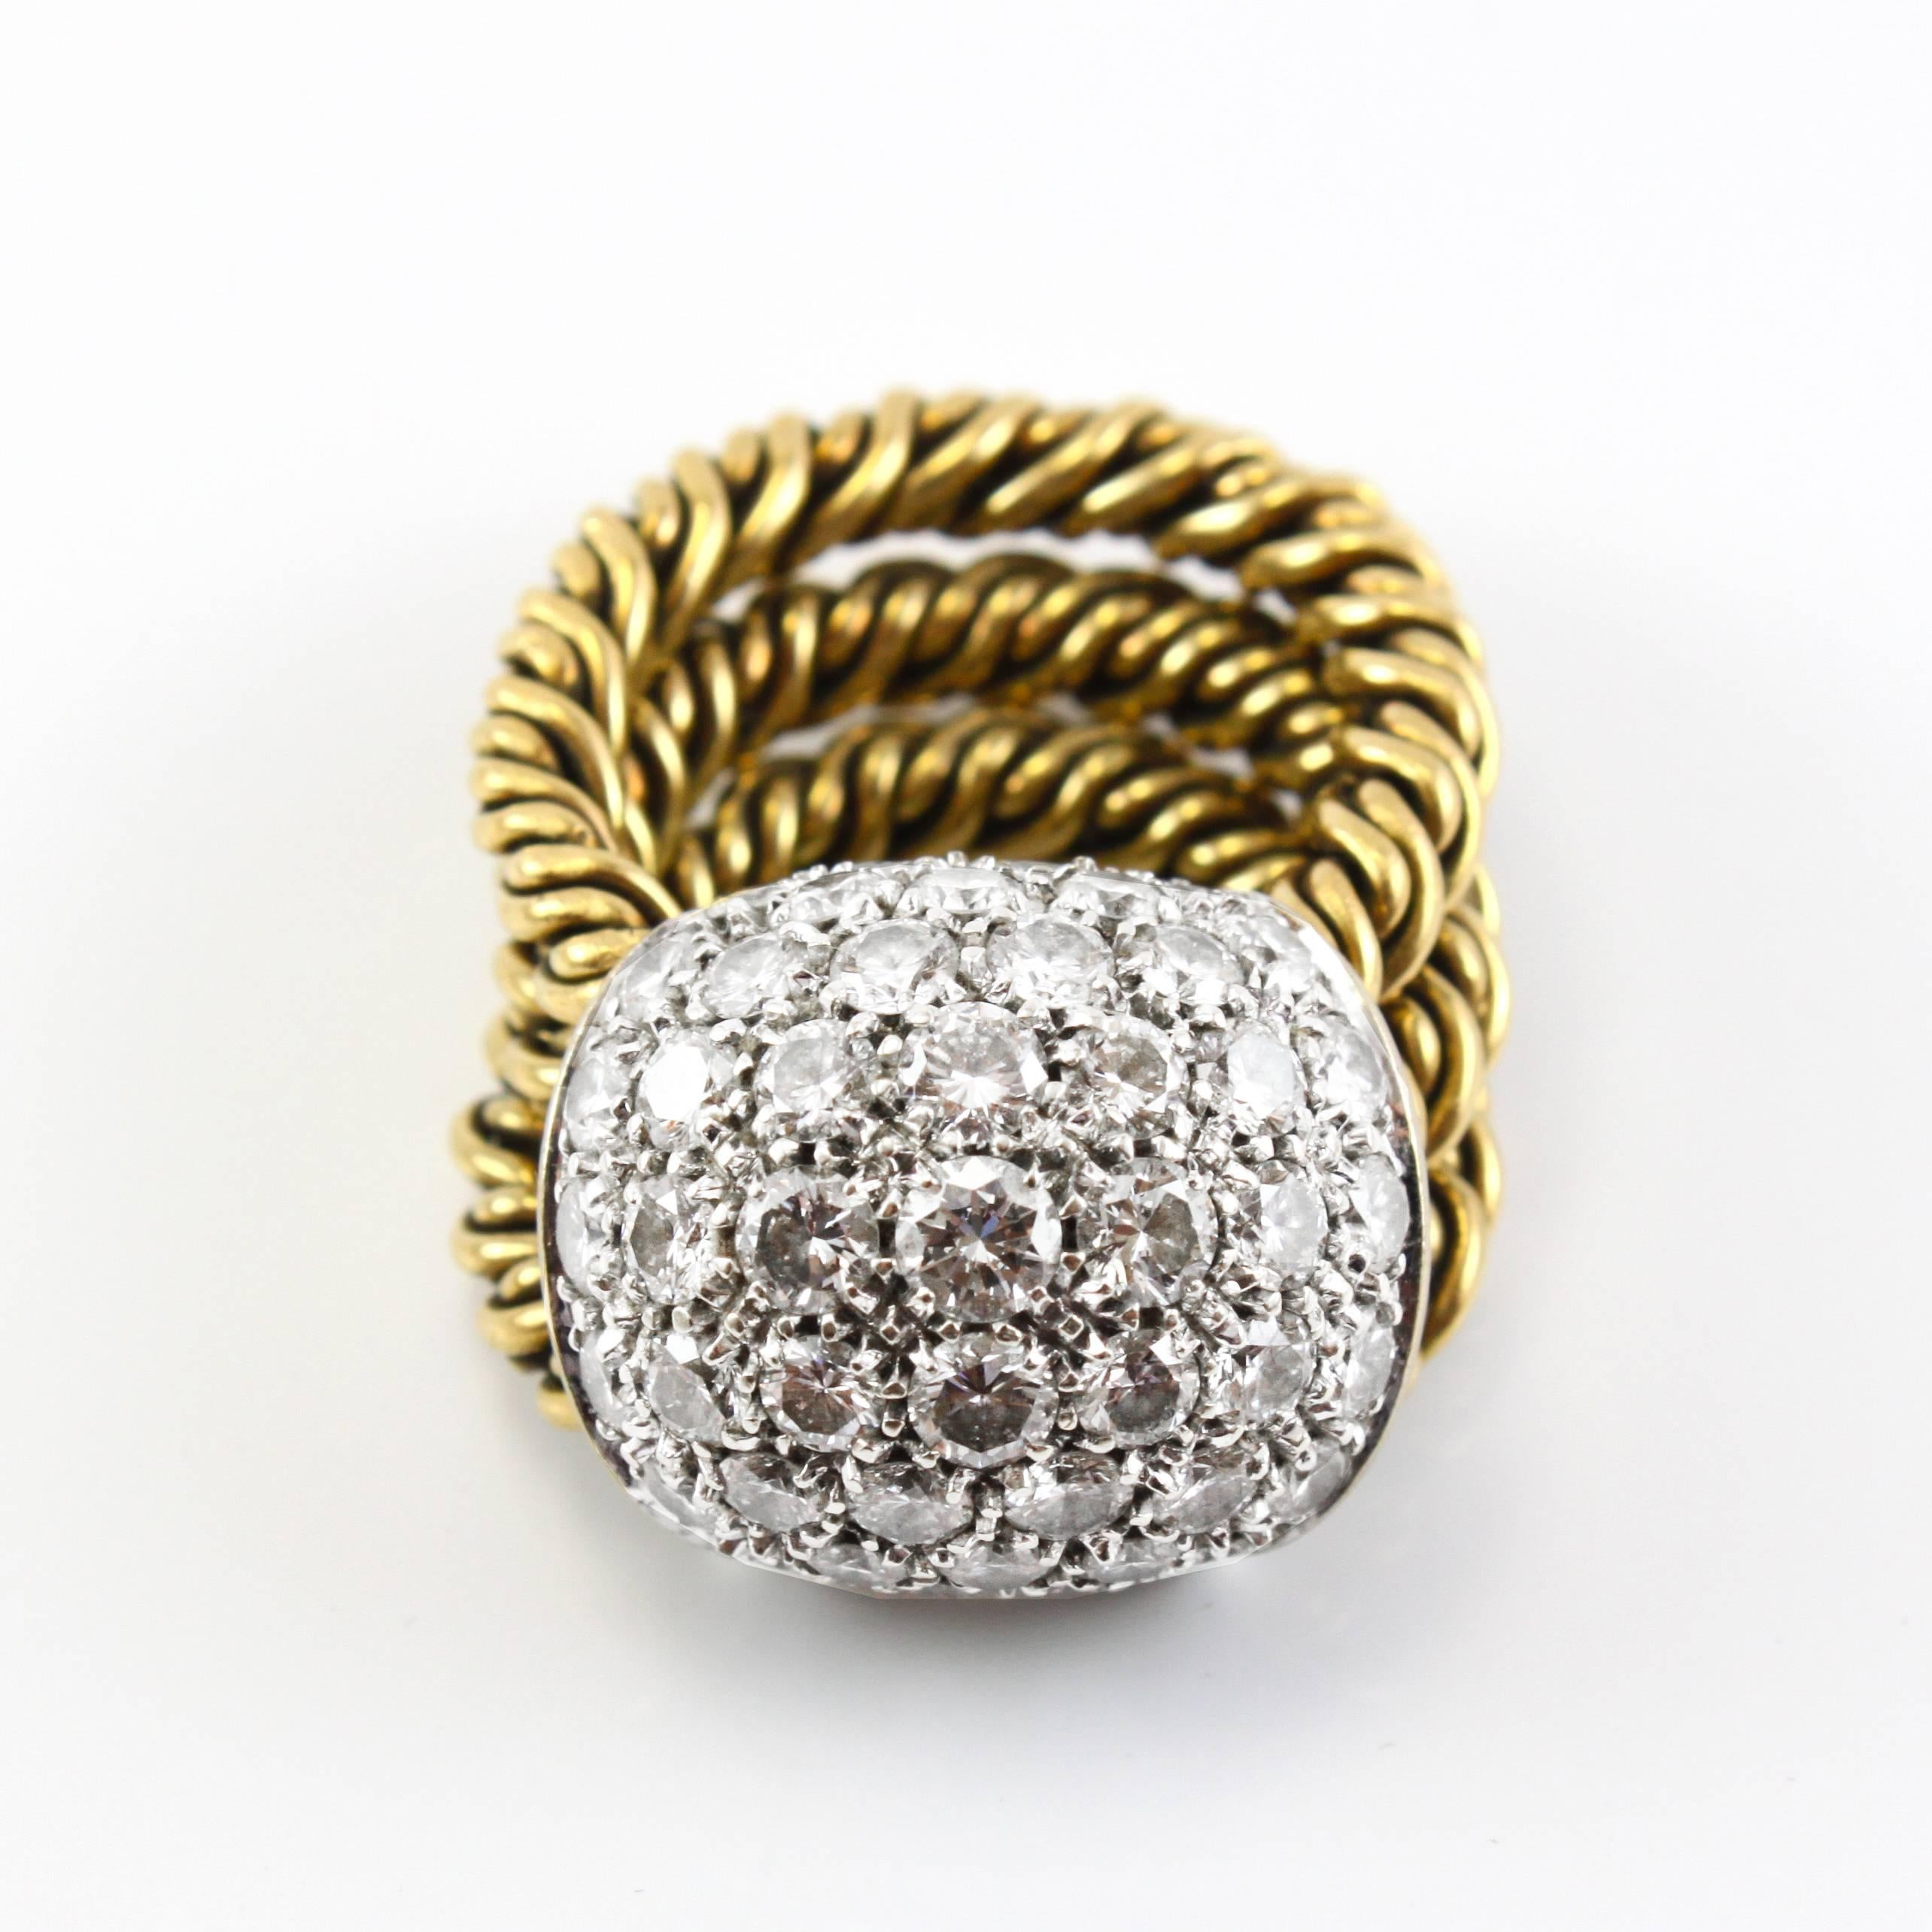 Playful diamond and gold ring by Pomellato. The diamonds are mounted on a dome shaped 18k white gold track which moves along the three woven 18k yellow gold ring bands. It is a fabulous piece that can be worn every day and feels very comfortable,